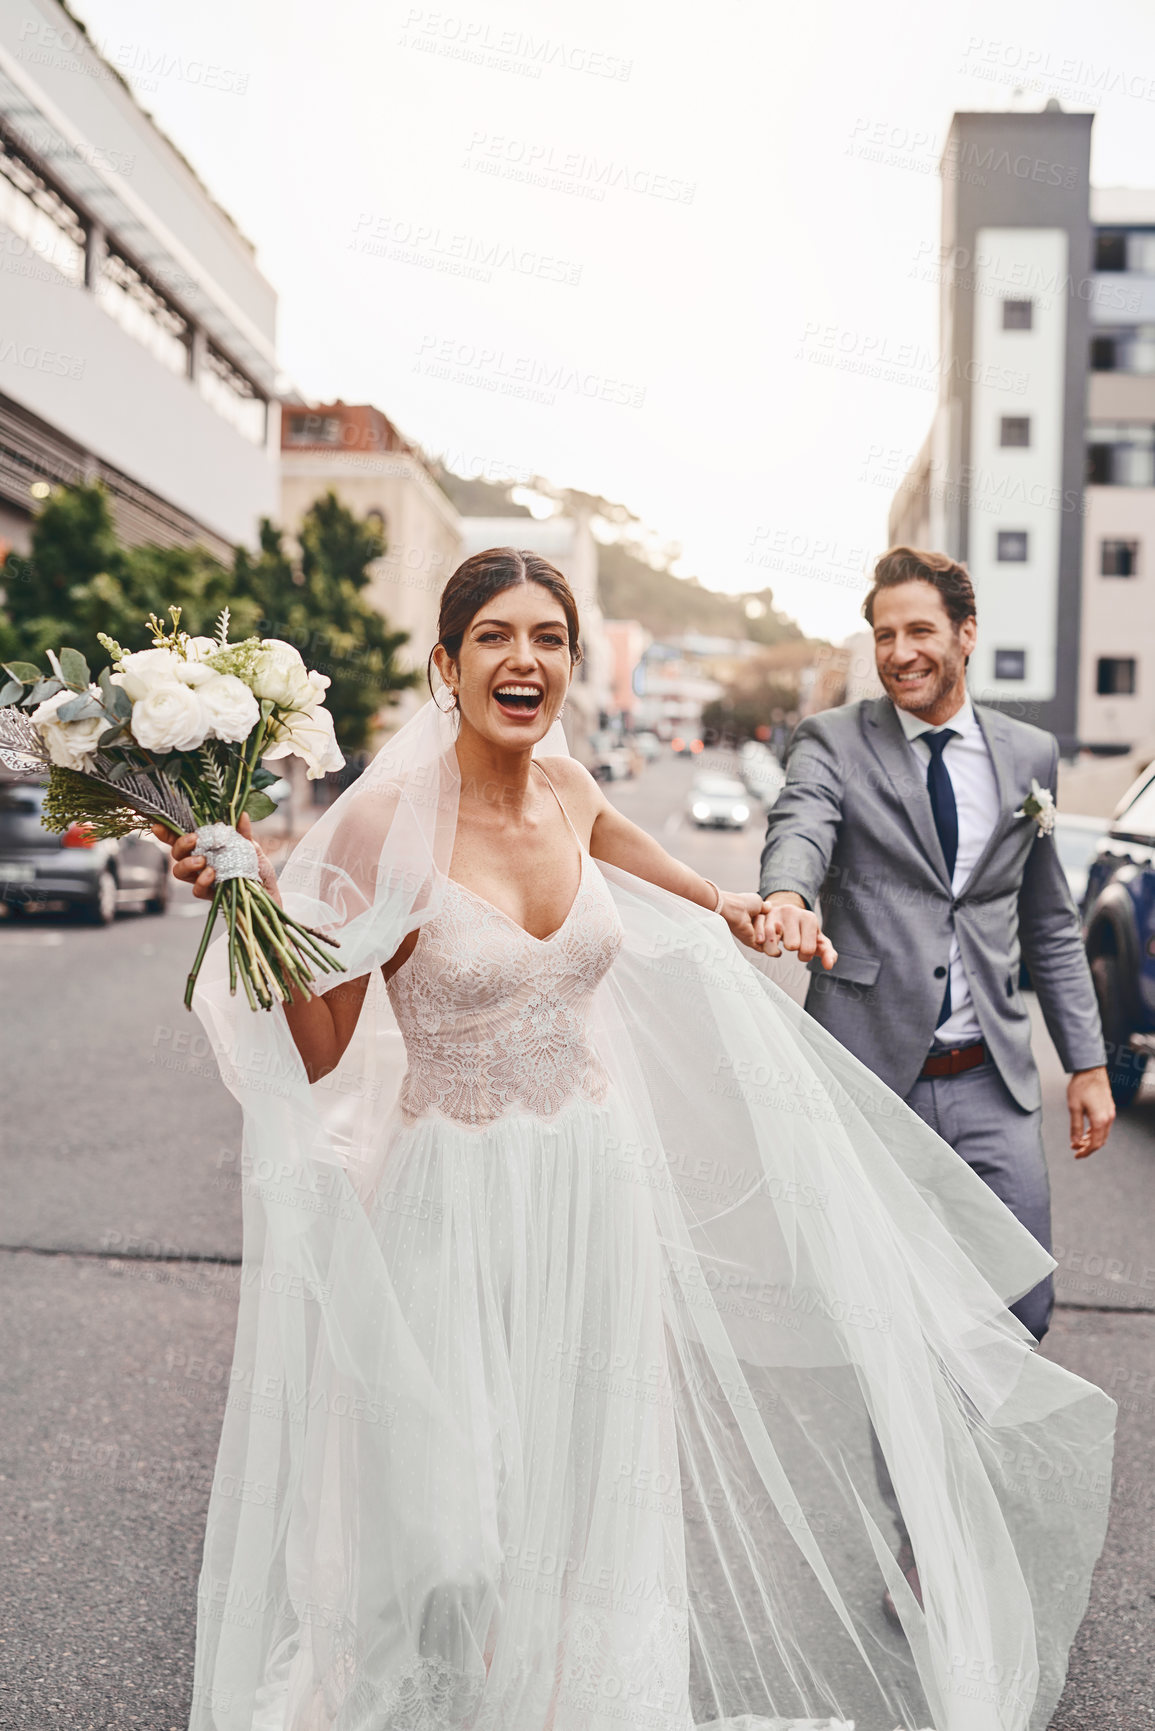 Buy stock photo Wedding, run and a happy couple in a city outdoor together after a ceremony of tradition or love. Flowers, marriage or smile with a man and woman holding hands while running as husband and wife